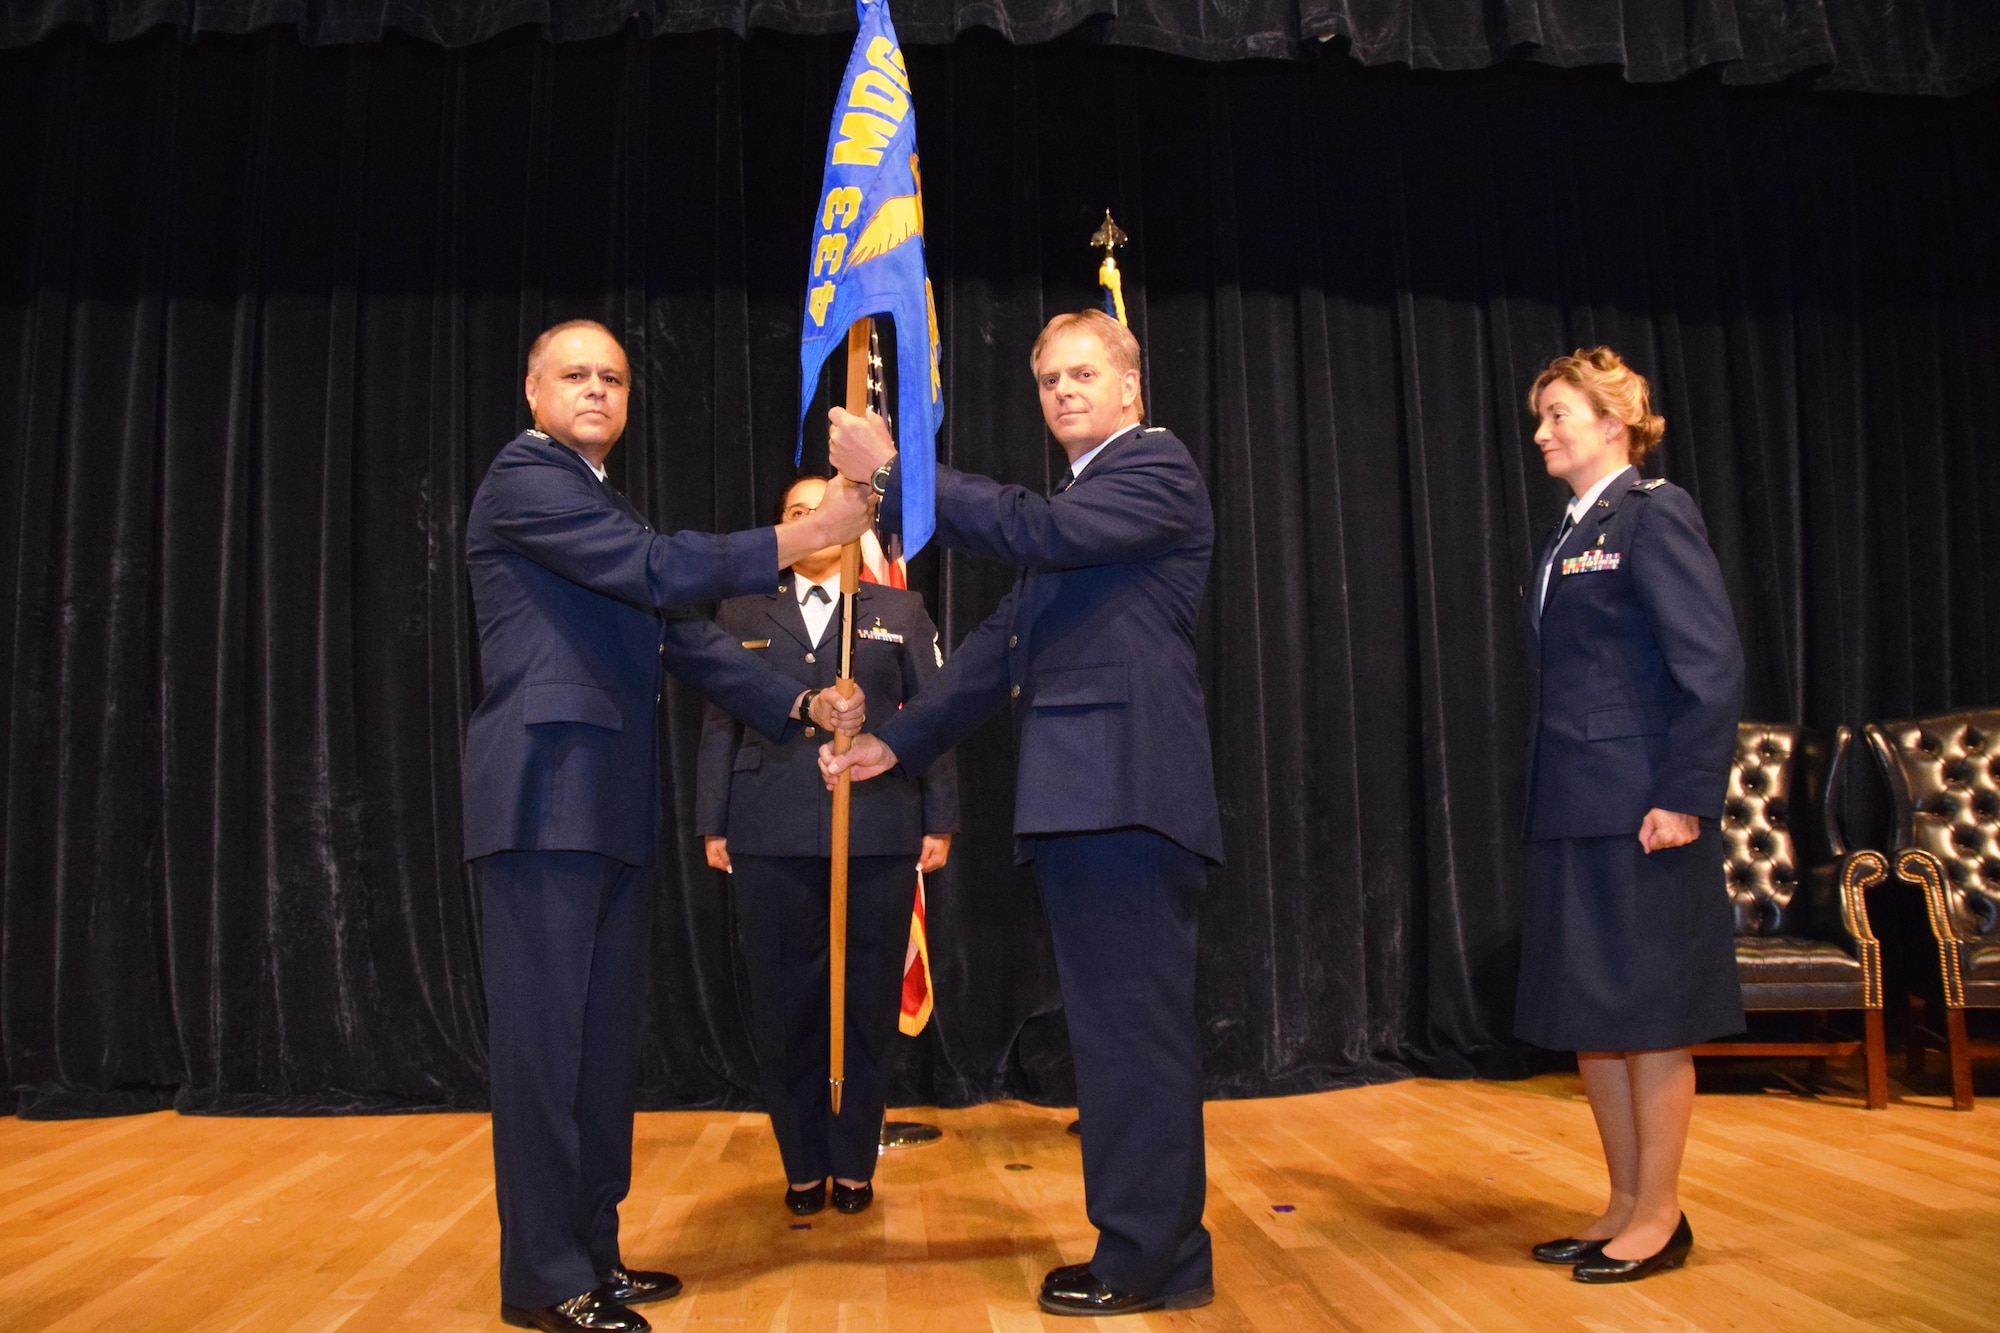 Col. Ernest Vasquez, 433rd Medical Group commander, passes the 433rd Aerospace Medicine Squadron guidon to the new squadron commander, Col. Paul B. Deschner, during an assumption of command ceremony at Joint Base San Antonio-Lackland, Texas,  Aug. 6, 2017.